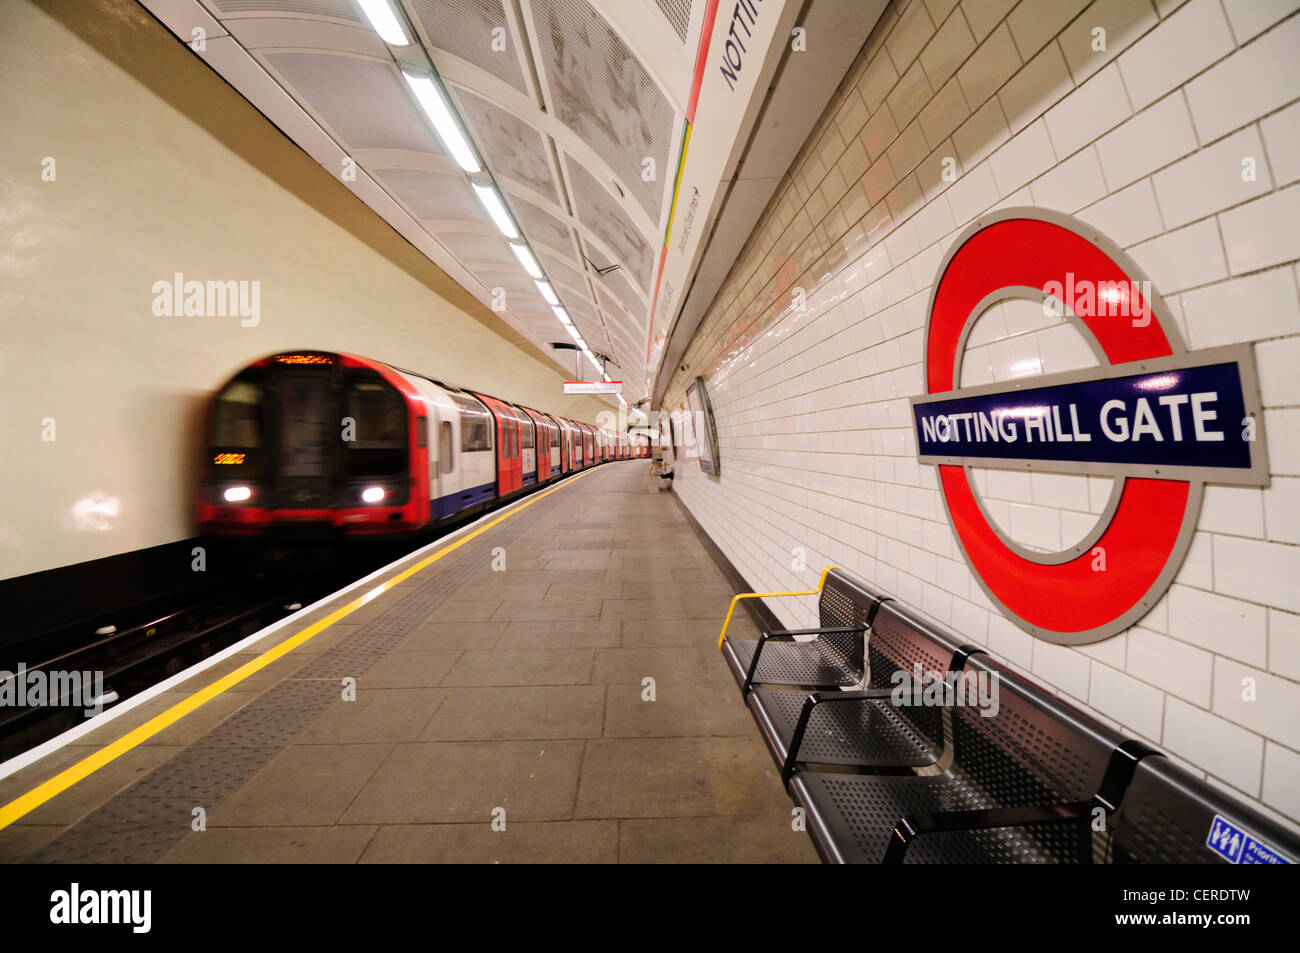 A Central line tube train departing Notting Hill Gate underground station. Stock Photo